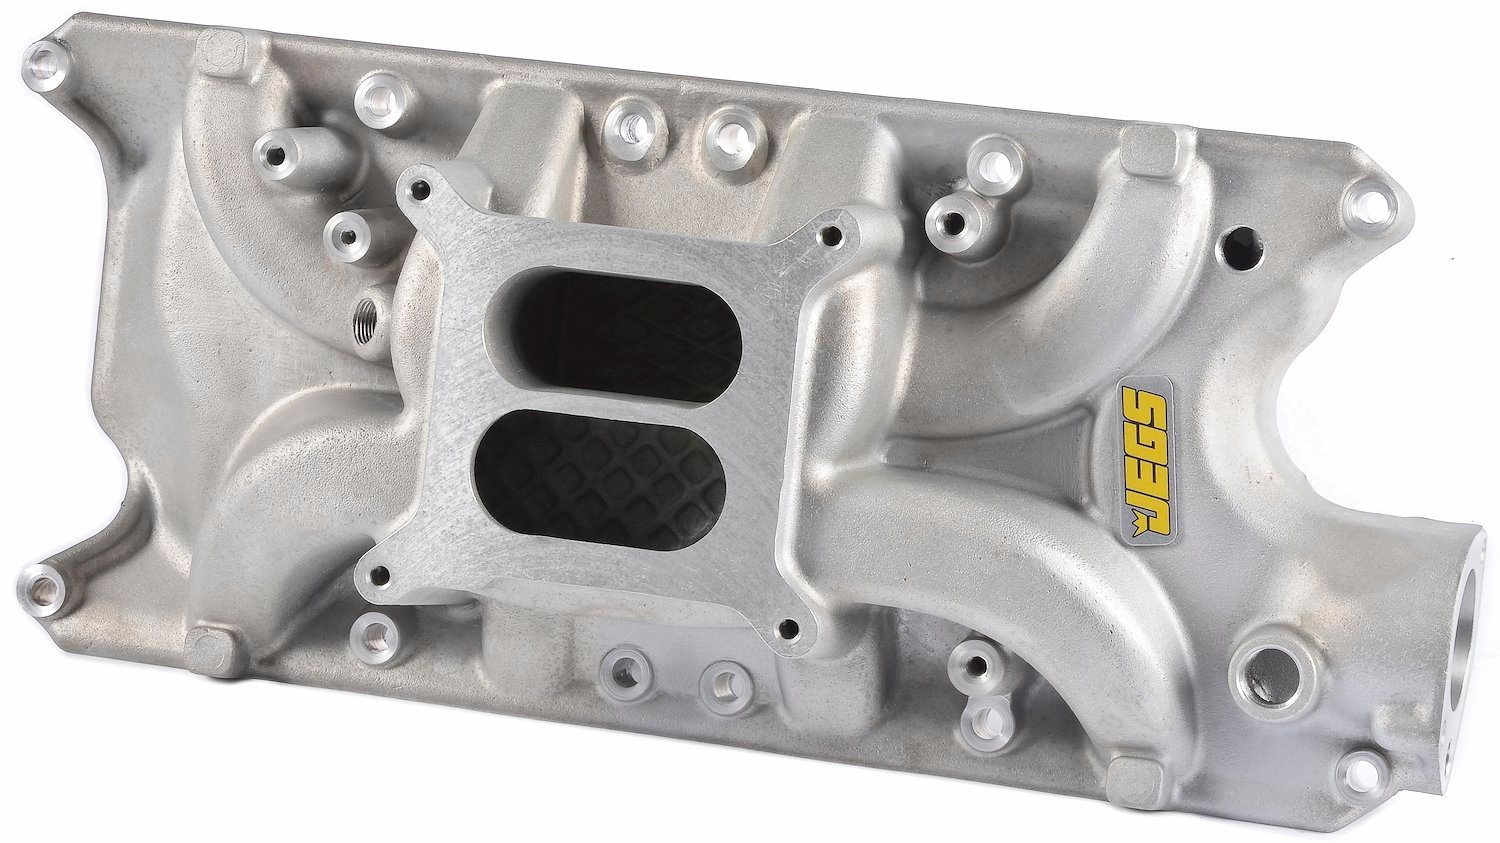 Intake Manifold for 1962-1985 Small Block Ford 260,